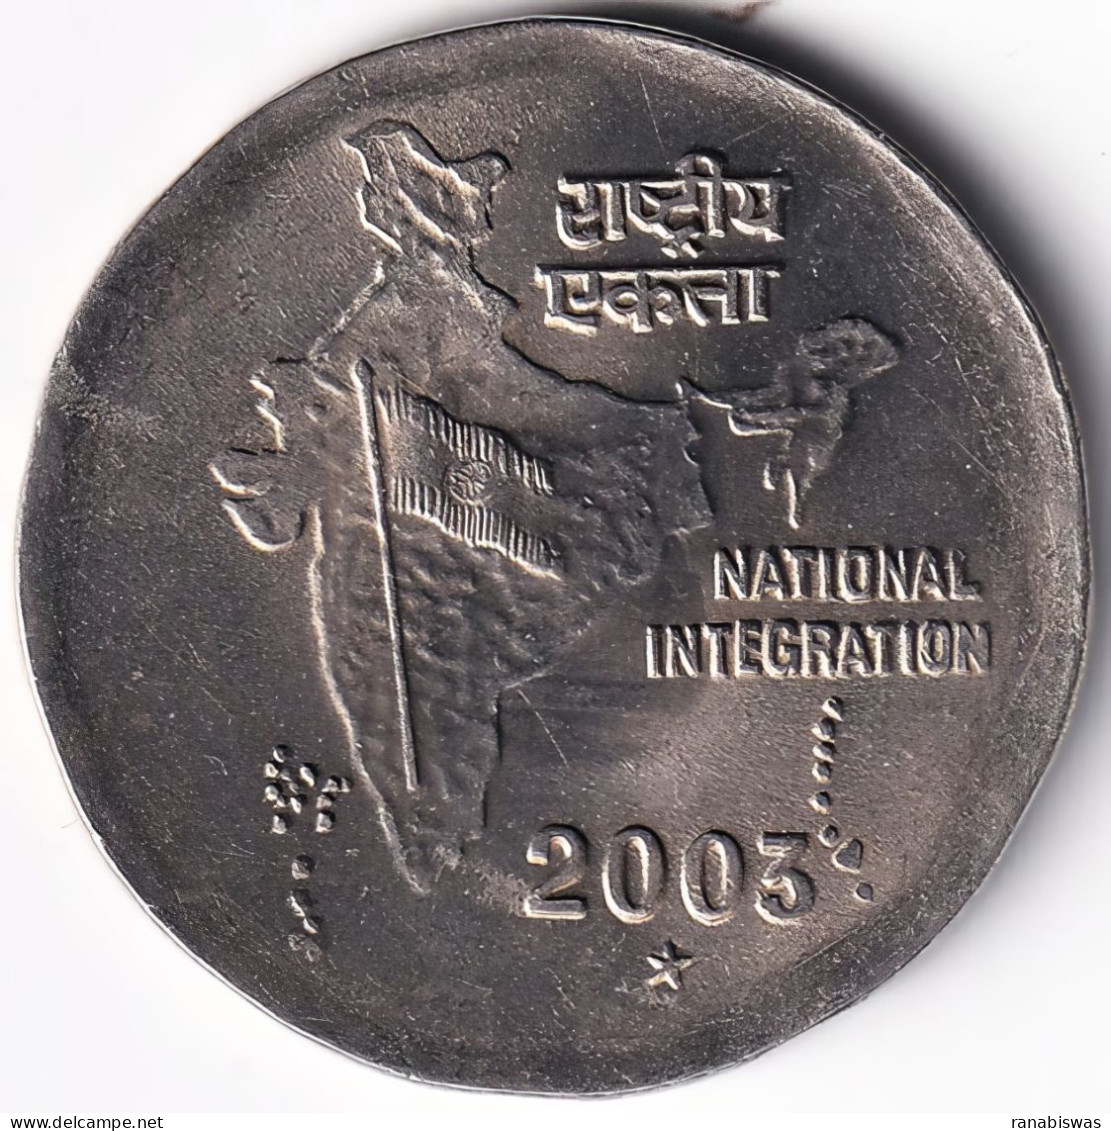 INDIA COIN LOT 120, 2 RUPEES 2003, HYDERABAD MINT, AUNC - Inde